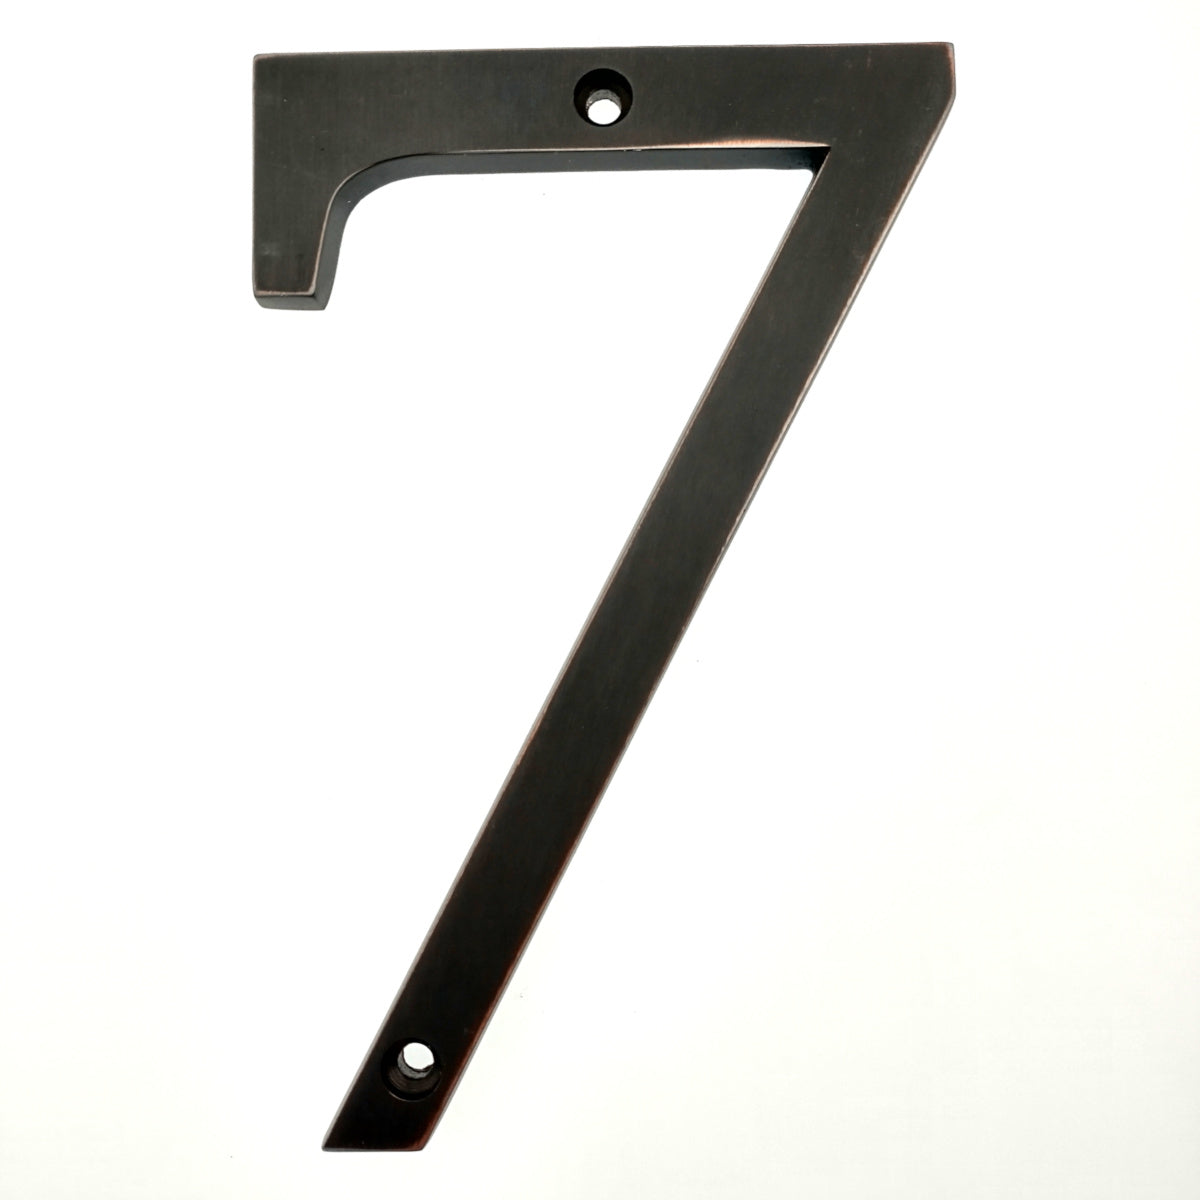 Large Bold 5" Aged Bronze Metal Flush House Address Numbers, Bold Easy-to-read Font